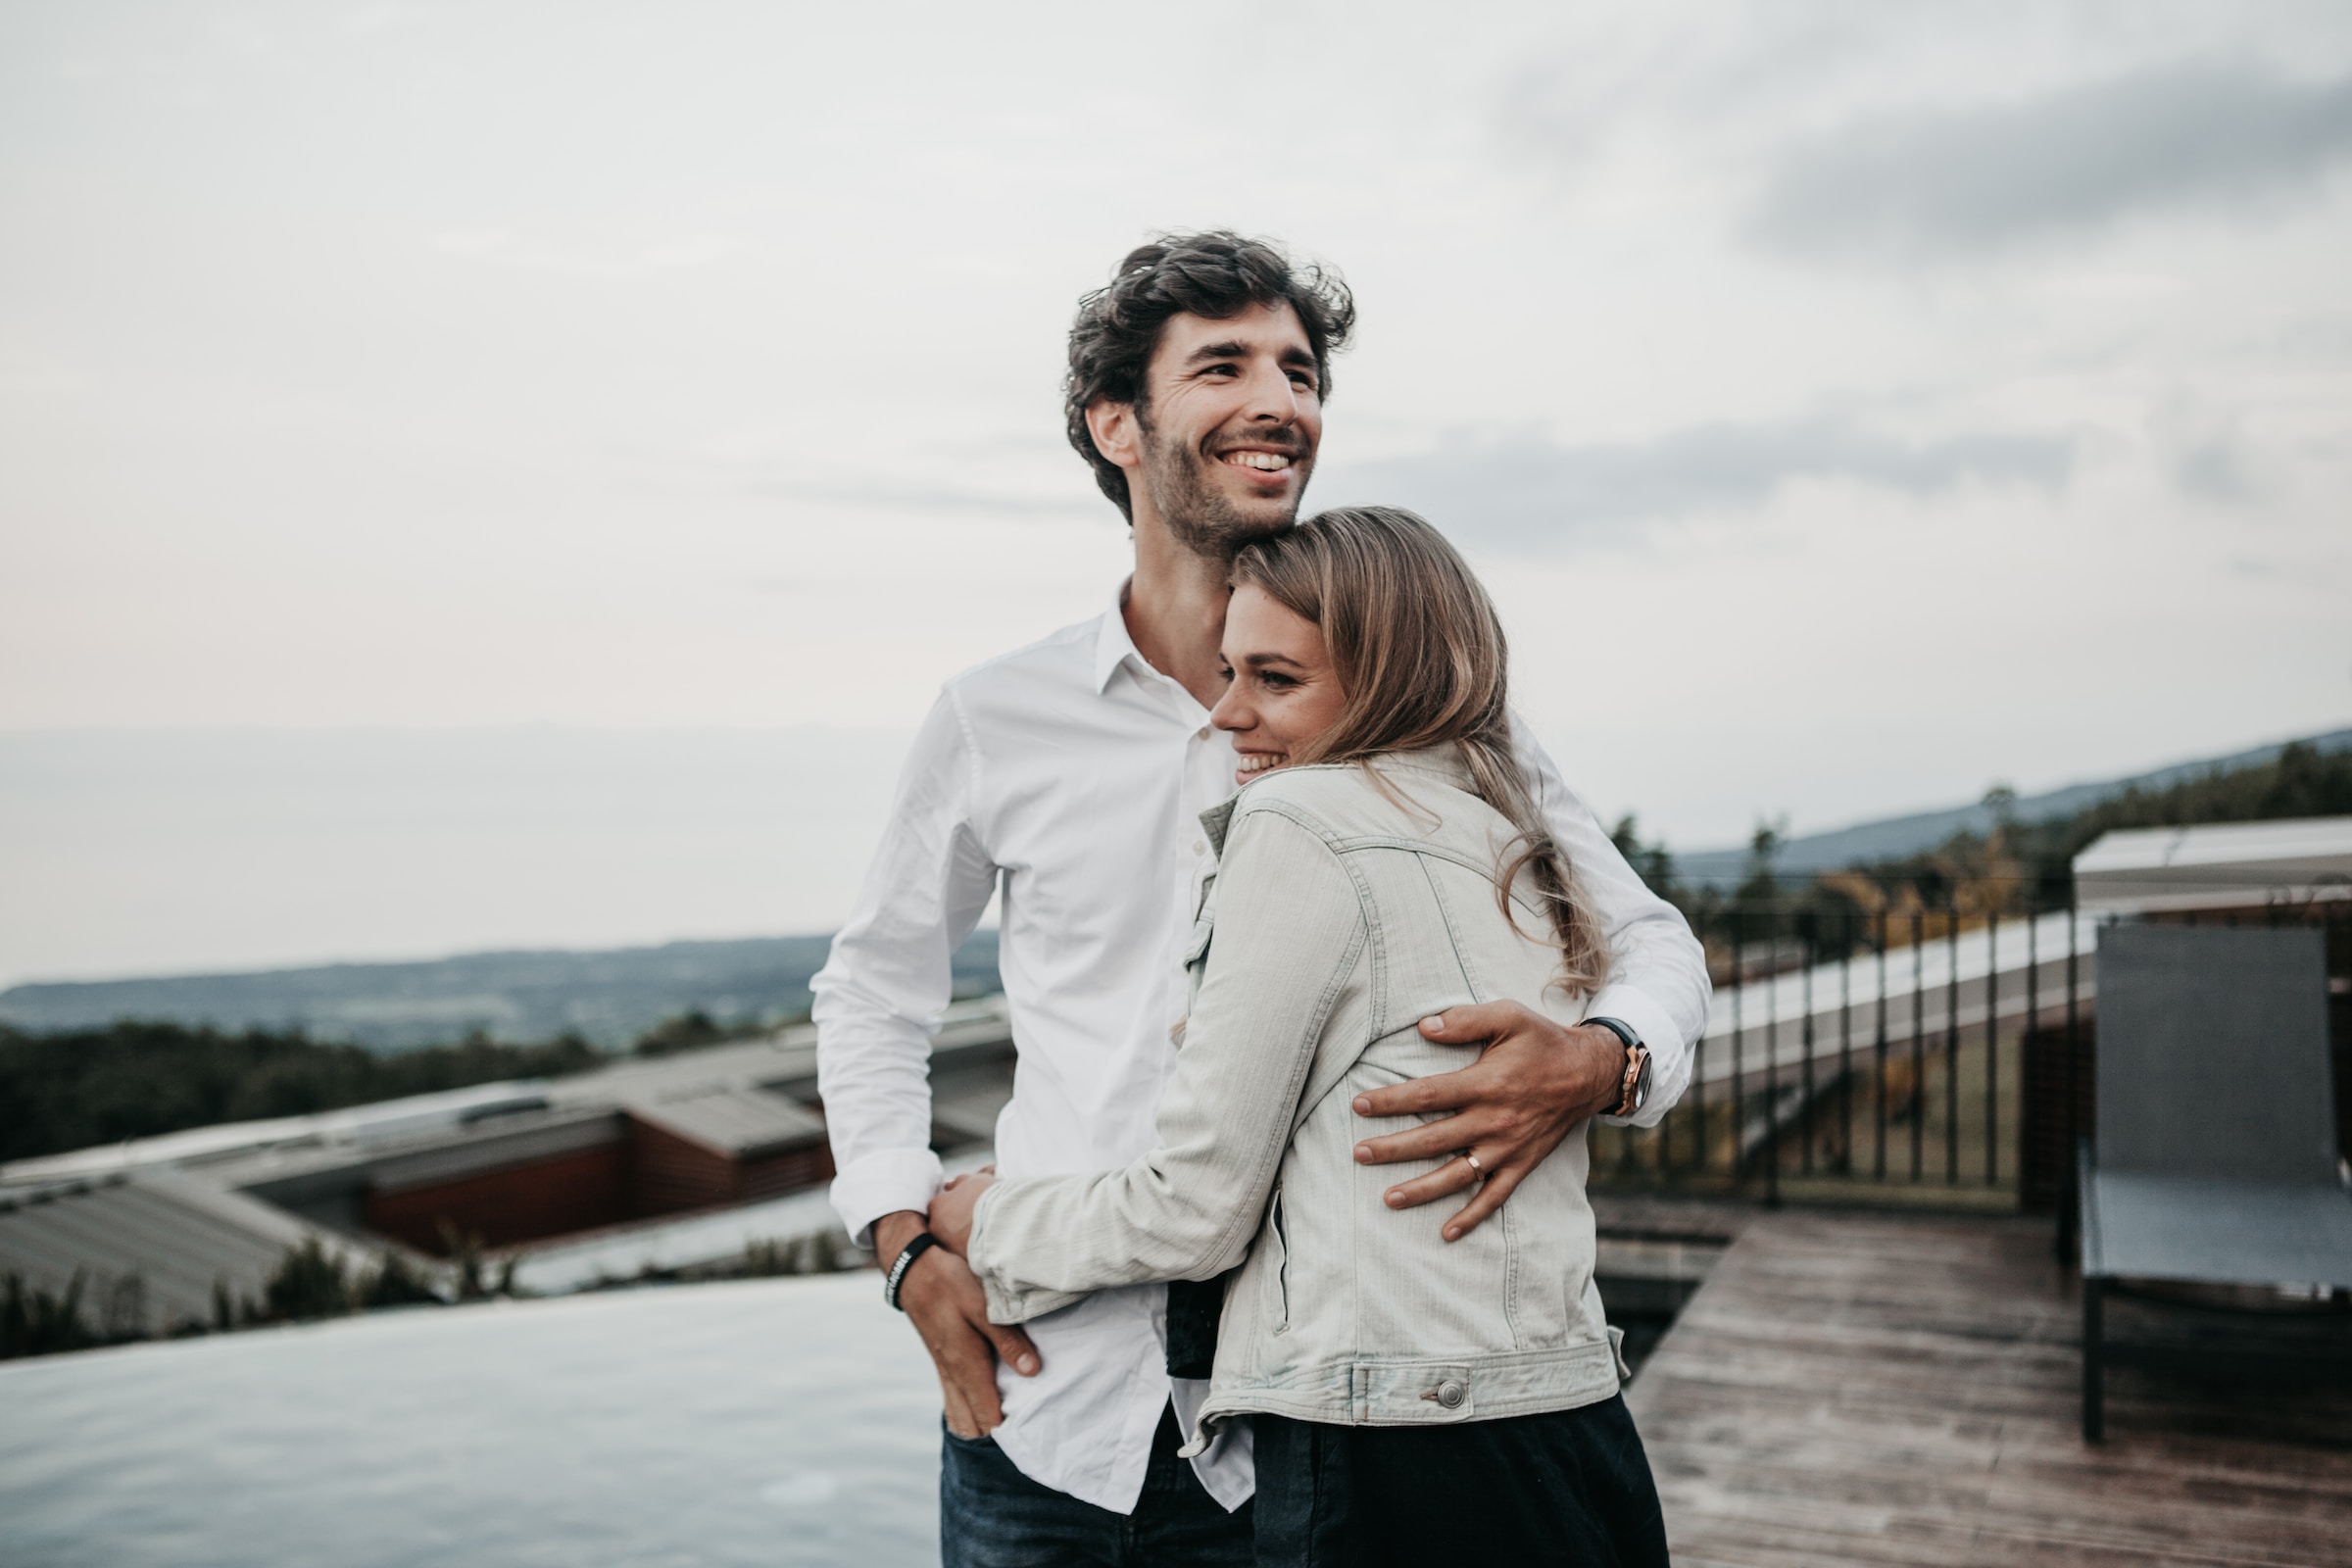 Couple embracing and smiling. | Source: Unsplash